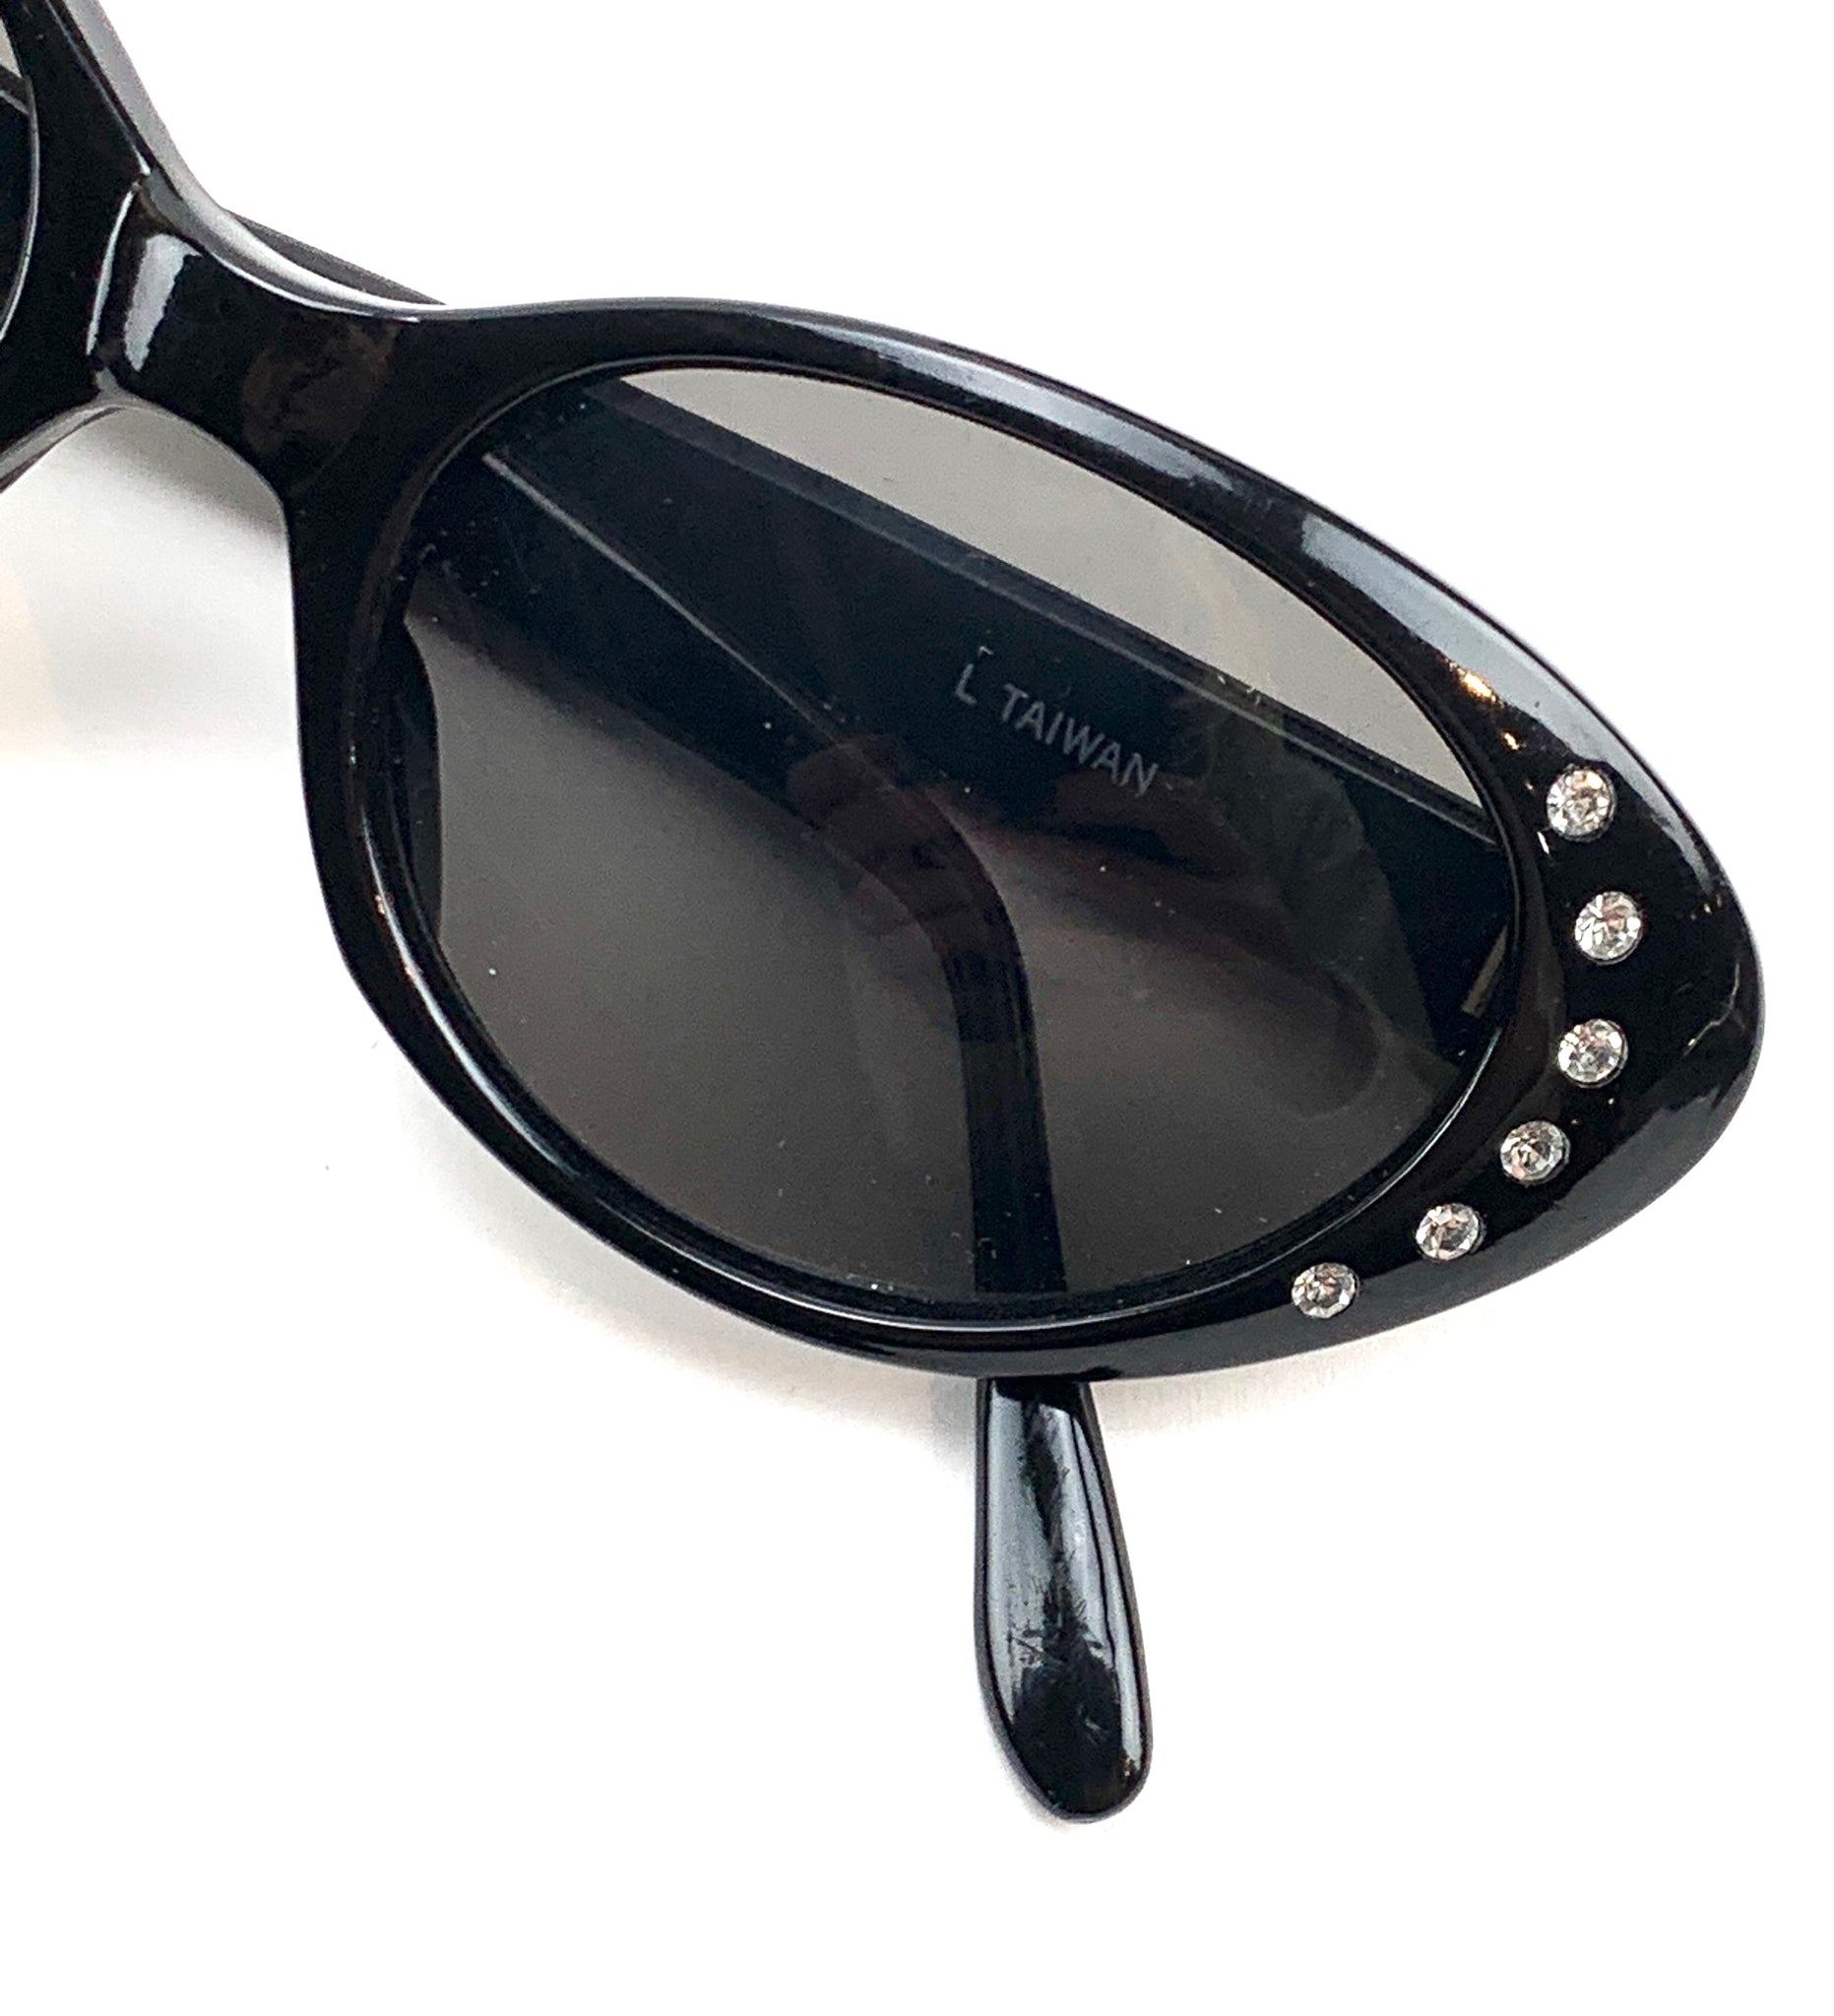 [The Golden Girls] McClanahan, Rue. (1934–2010) Cat-Eye Sunglasses from McClanahan Collection